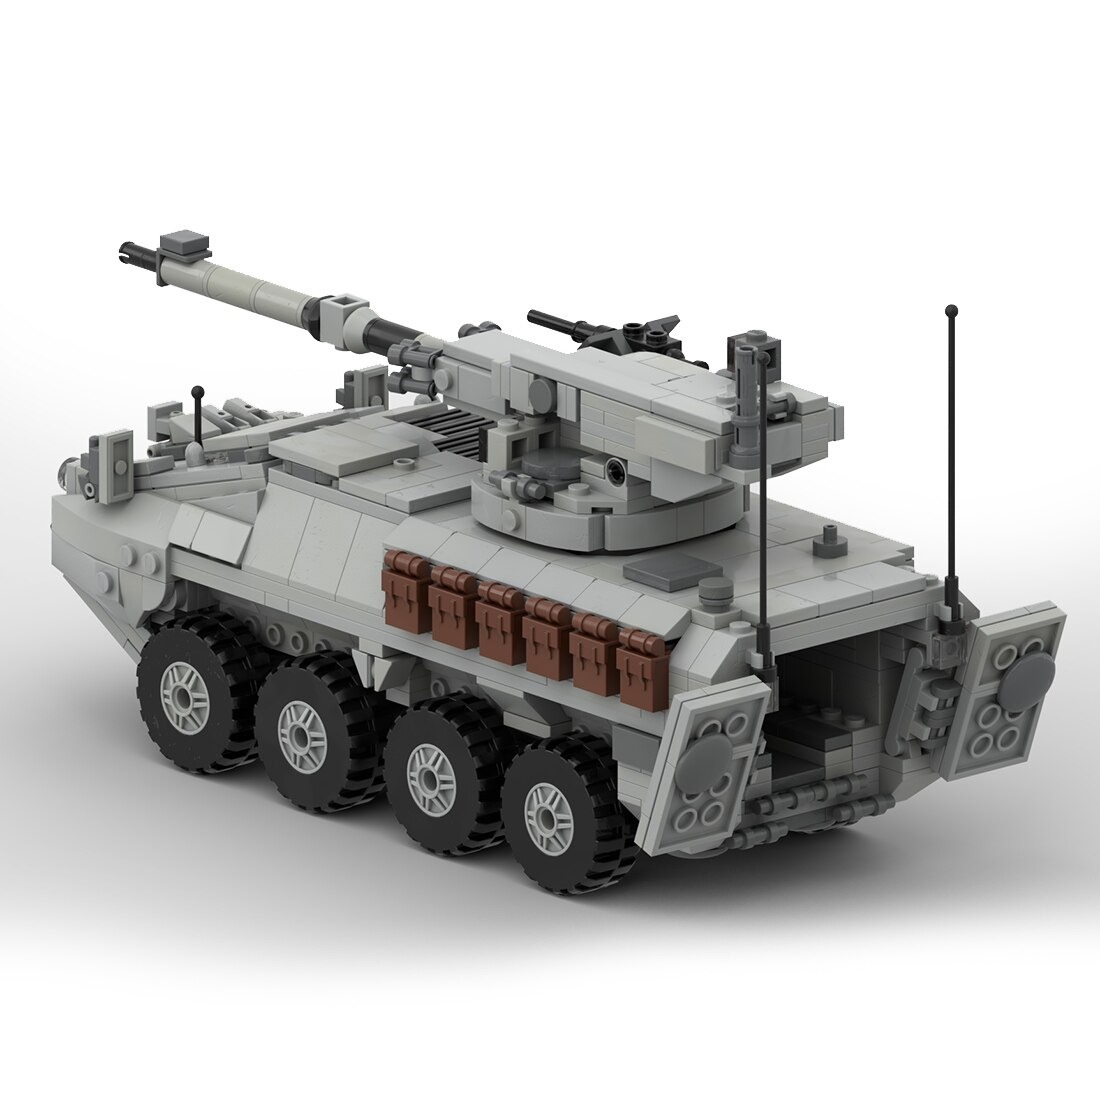 moc 60244 m 1128 stryker mgs military the main 1 - MOULD KING